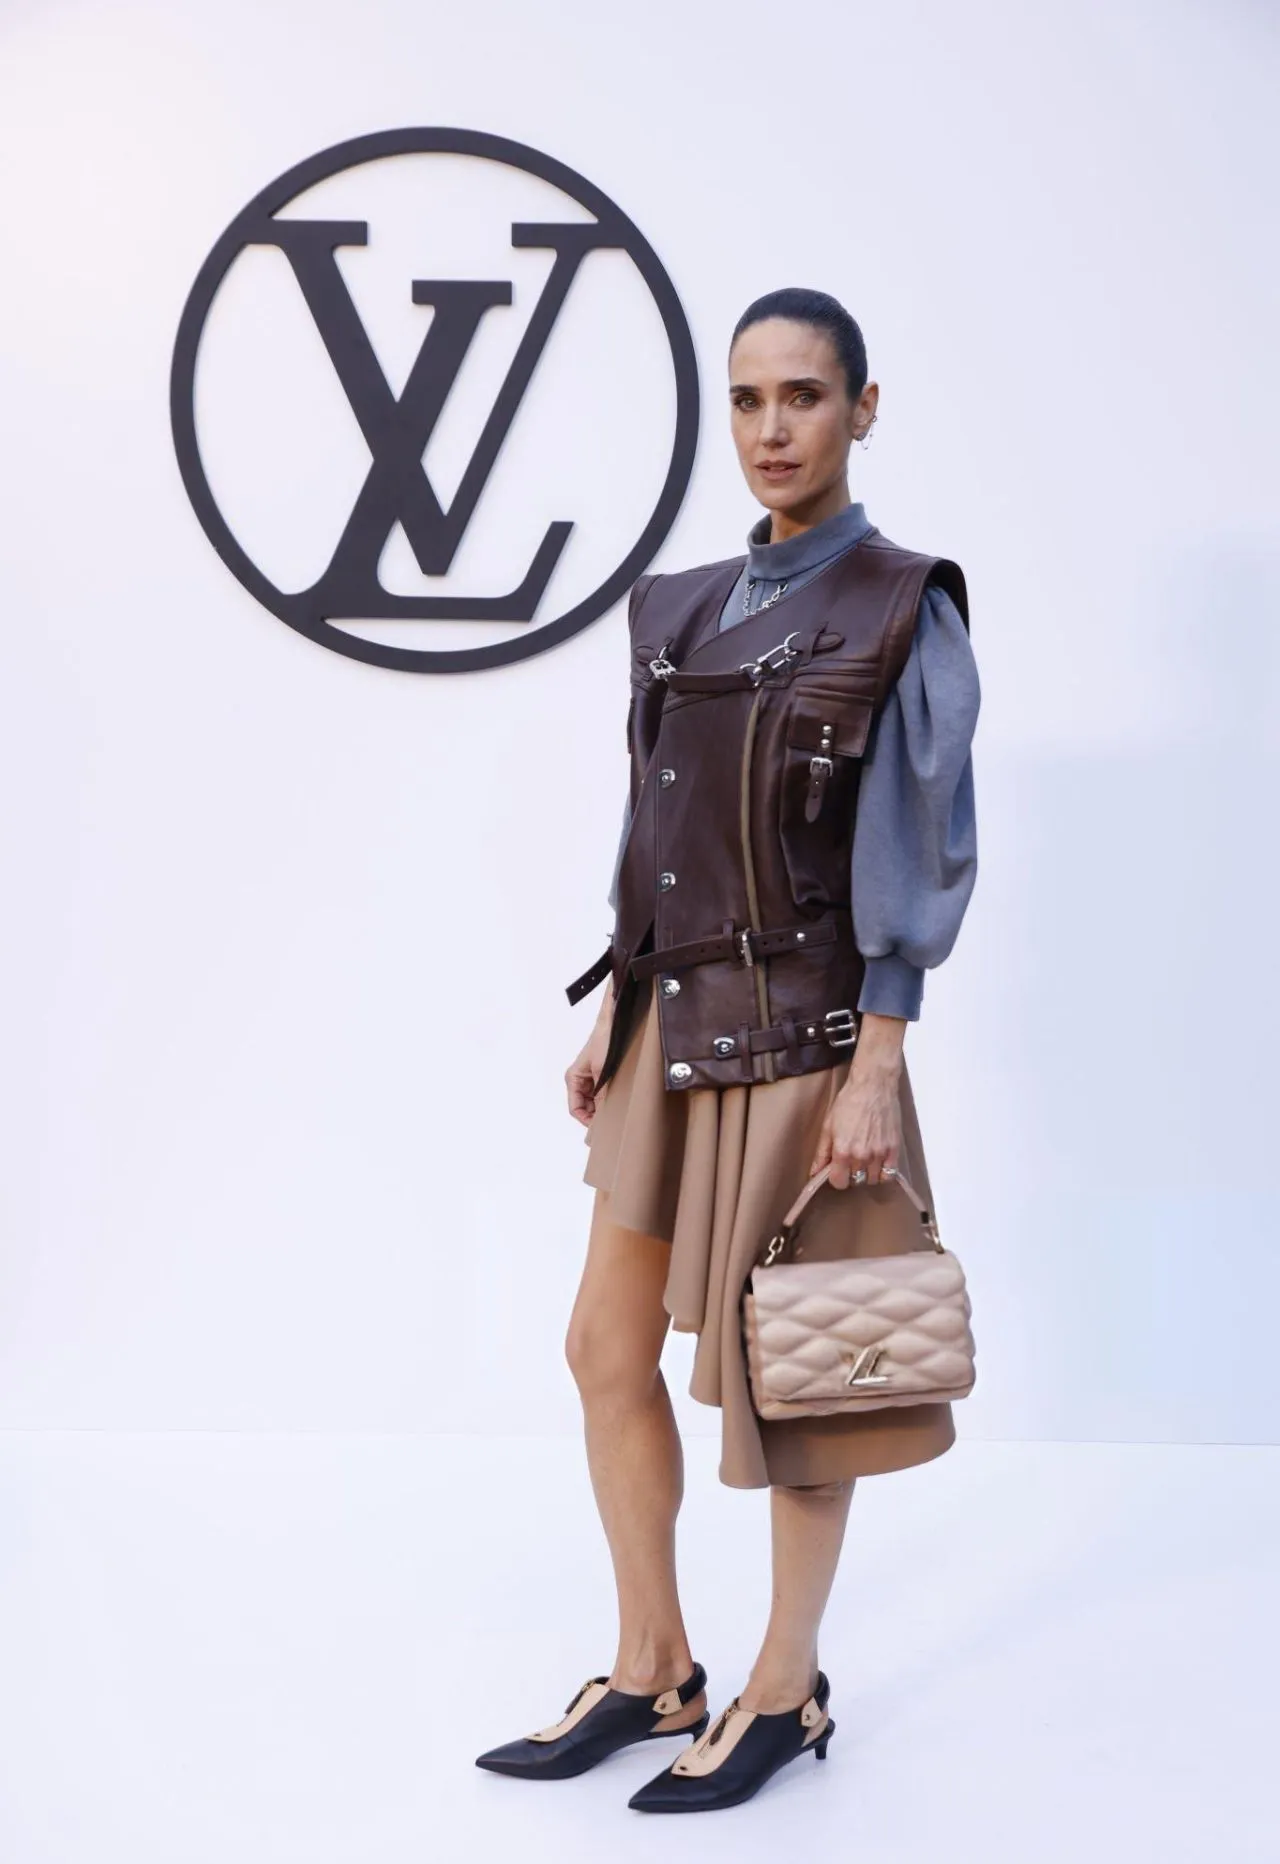 JENNIFER CONNELLY AT LOUIS VUITTON PHOTOCALL FASHION SHOW IN BARCELONA